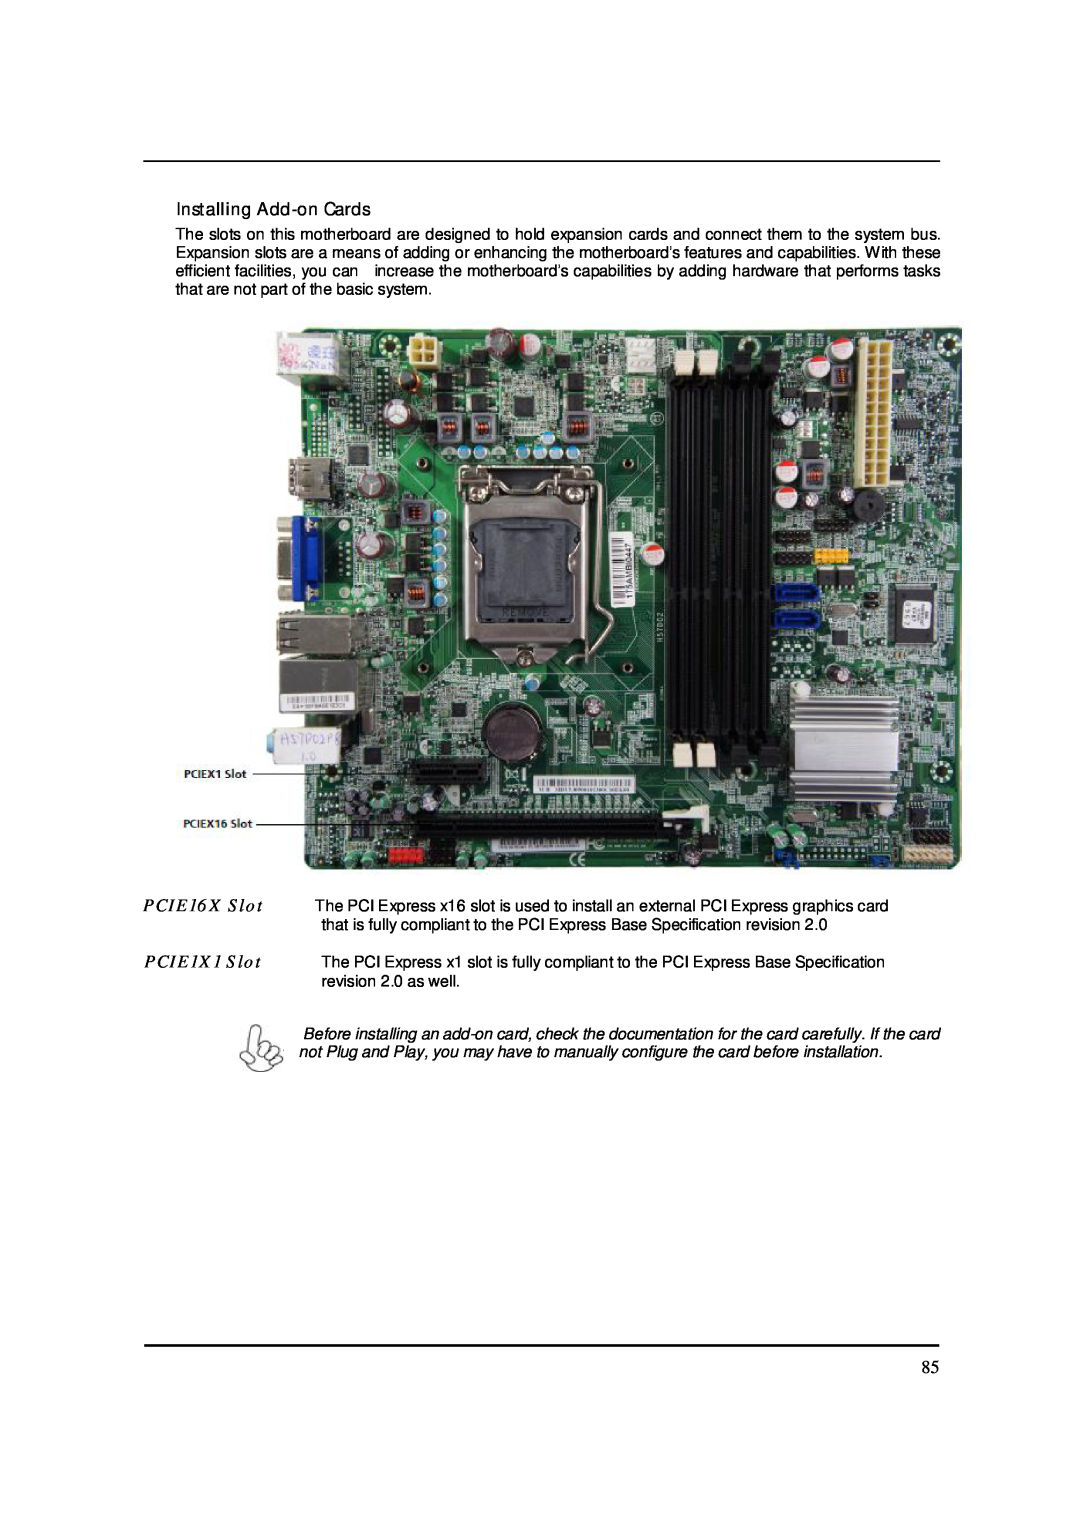 Acer S3811 manual Installing Add-on Cards, PCIE1X1 Slot 